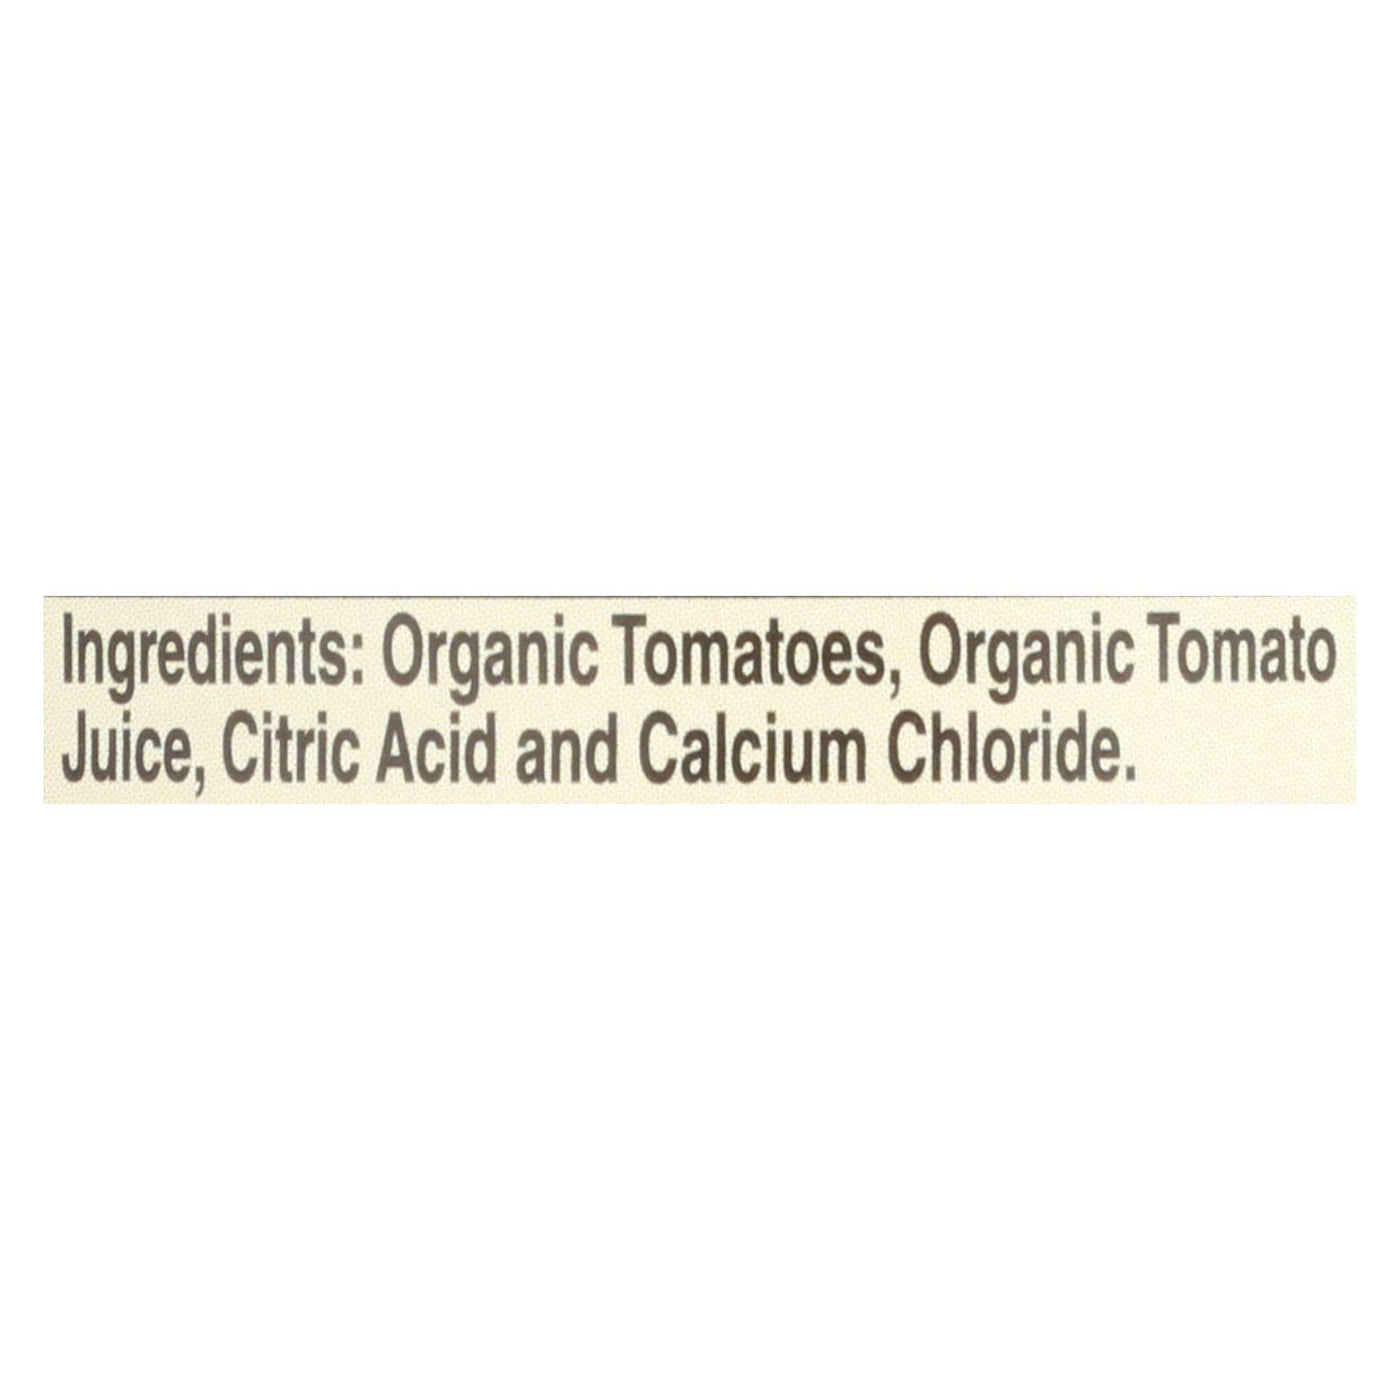 Buy Muir Glen Diced Tomatoes - Tomato - Case Of 12 - 14.5 Oz.  at OnlyNaturals.us